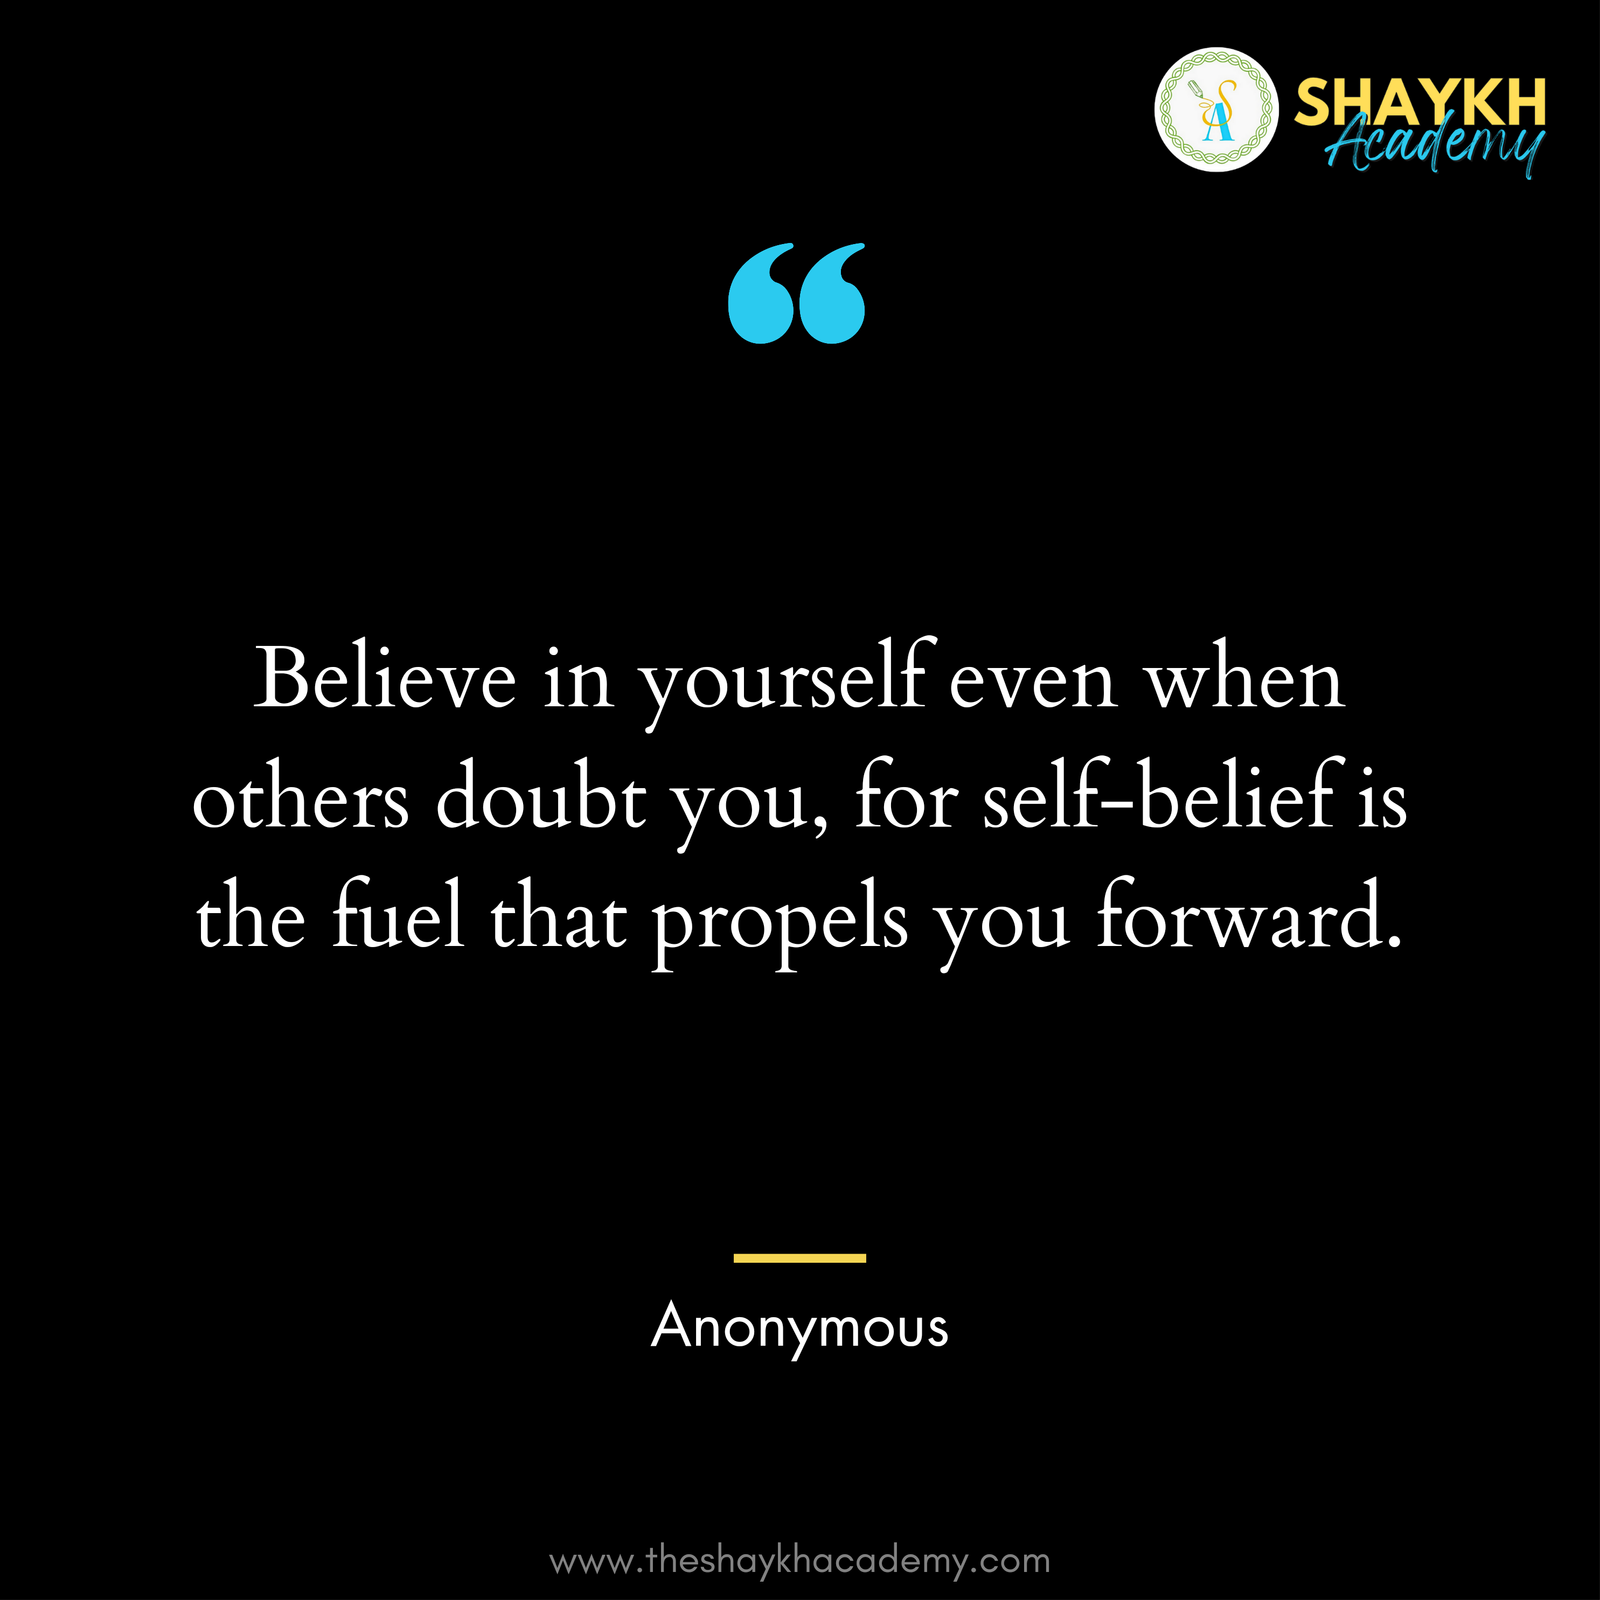 Believe in yourself even when others doubt you, for self-belief is the fuel that propels you forward.